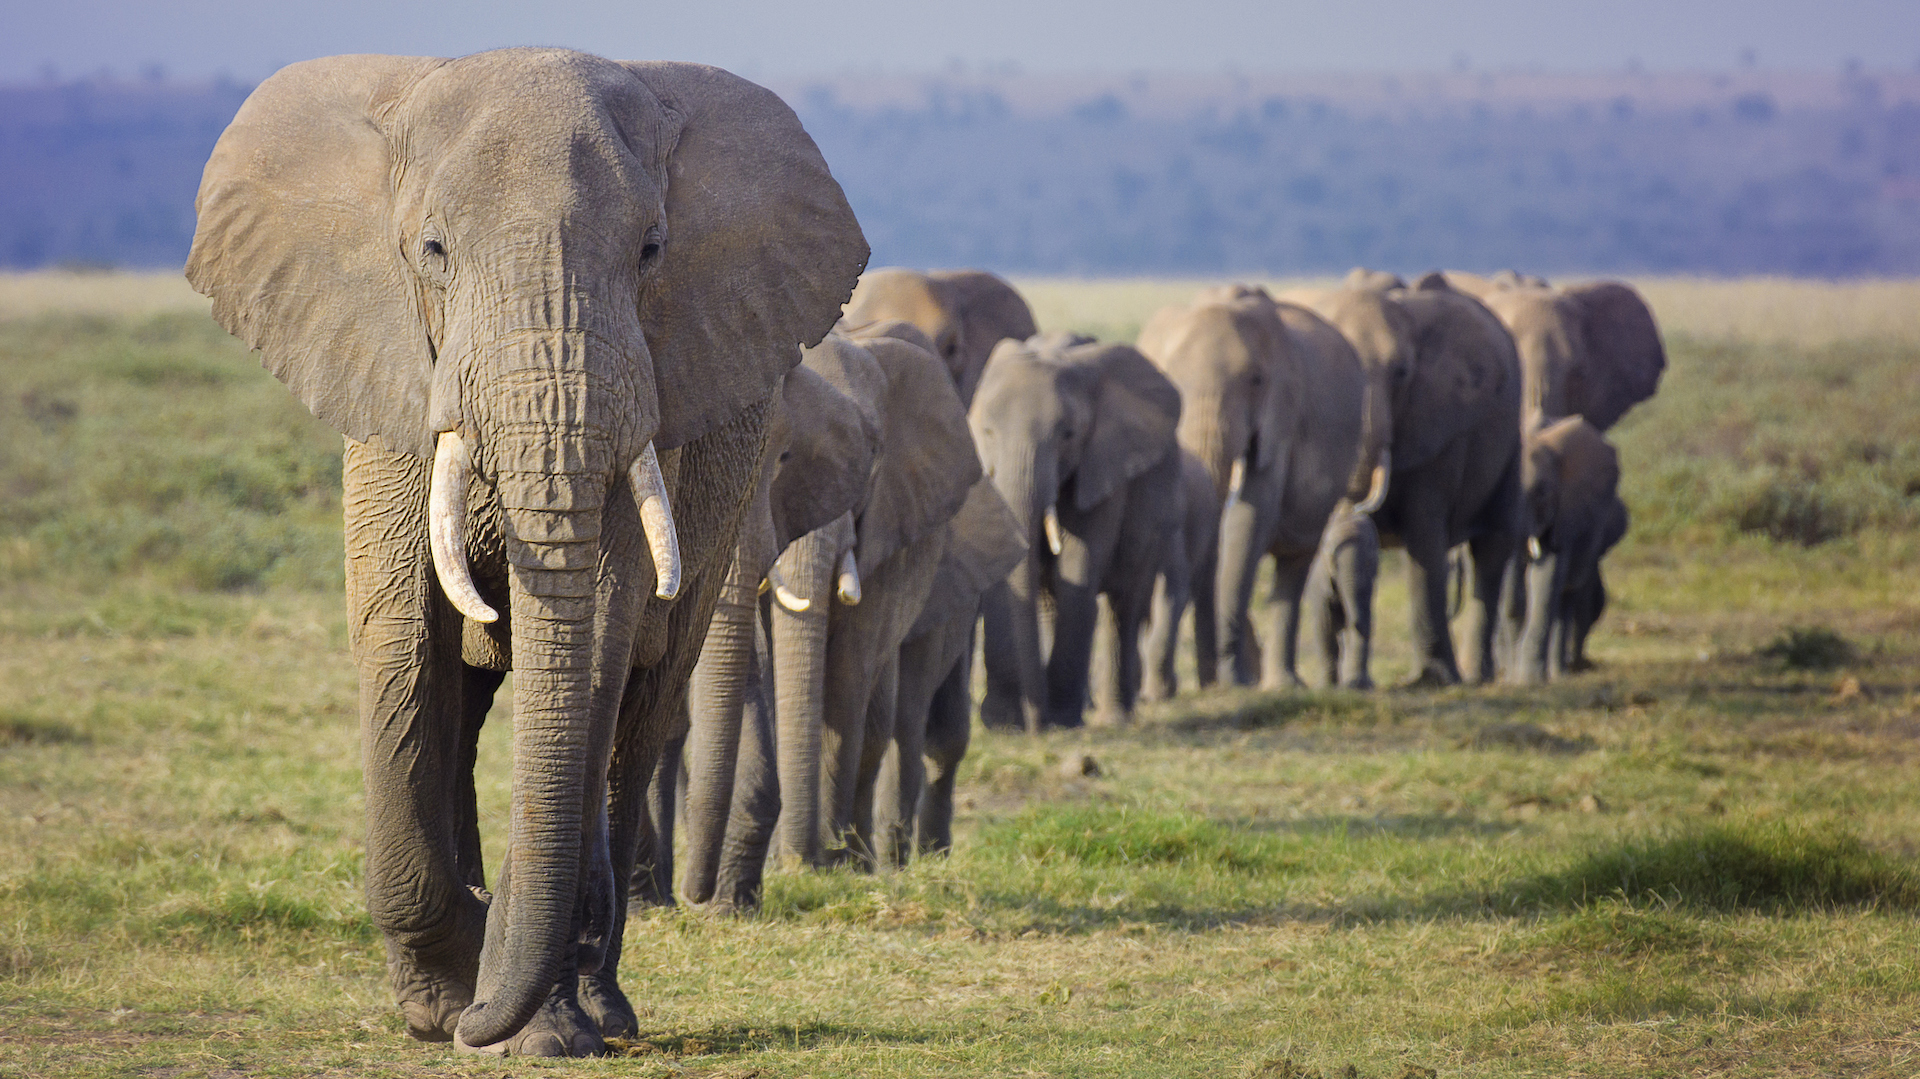 A photograph of a herd of elephants marching in a line on the savannah.